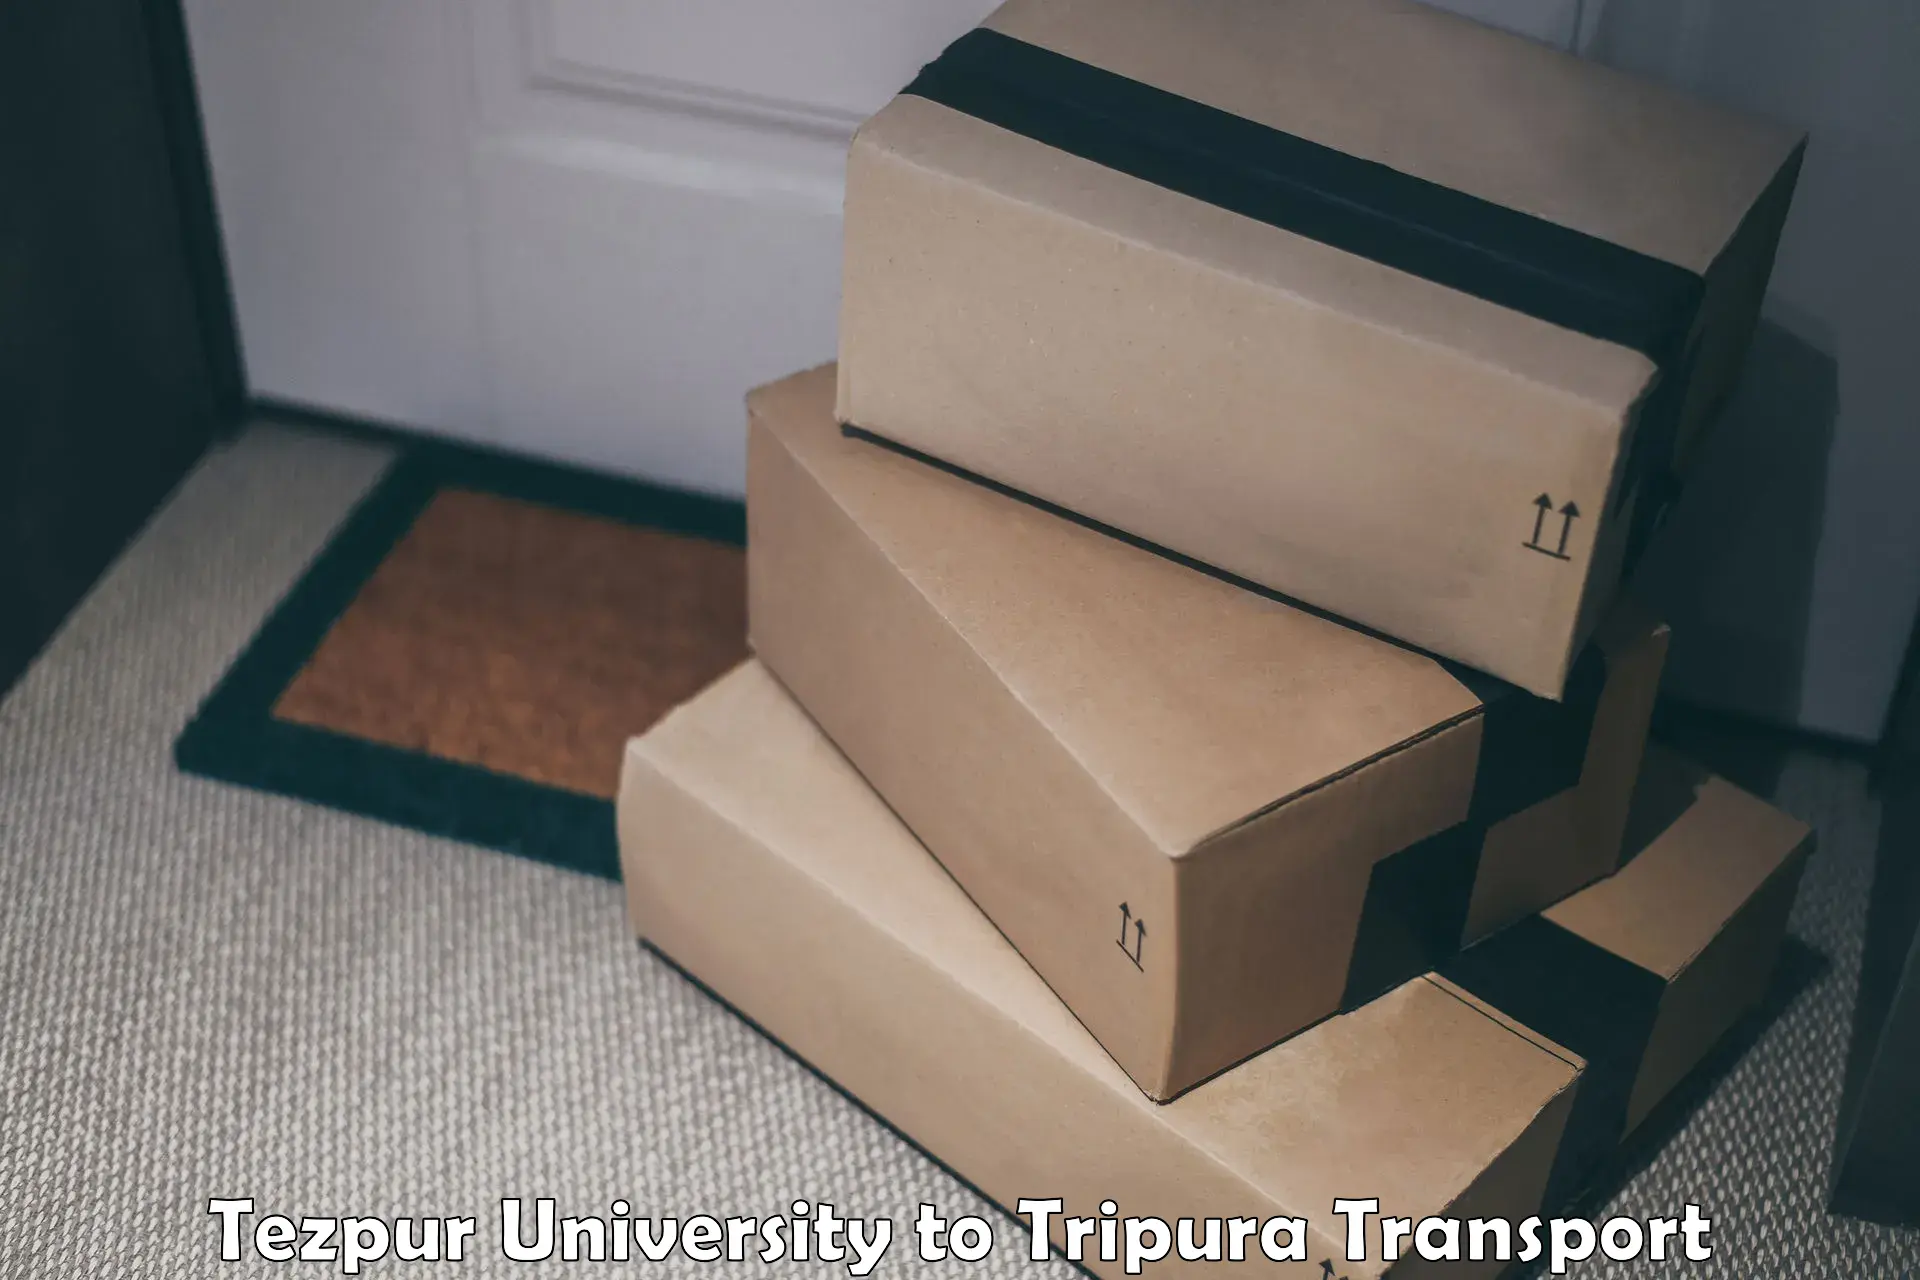 Daily transport service Tezpur University to Manughat